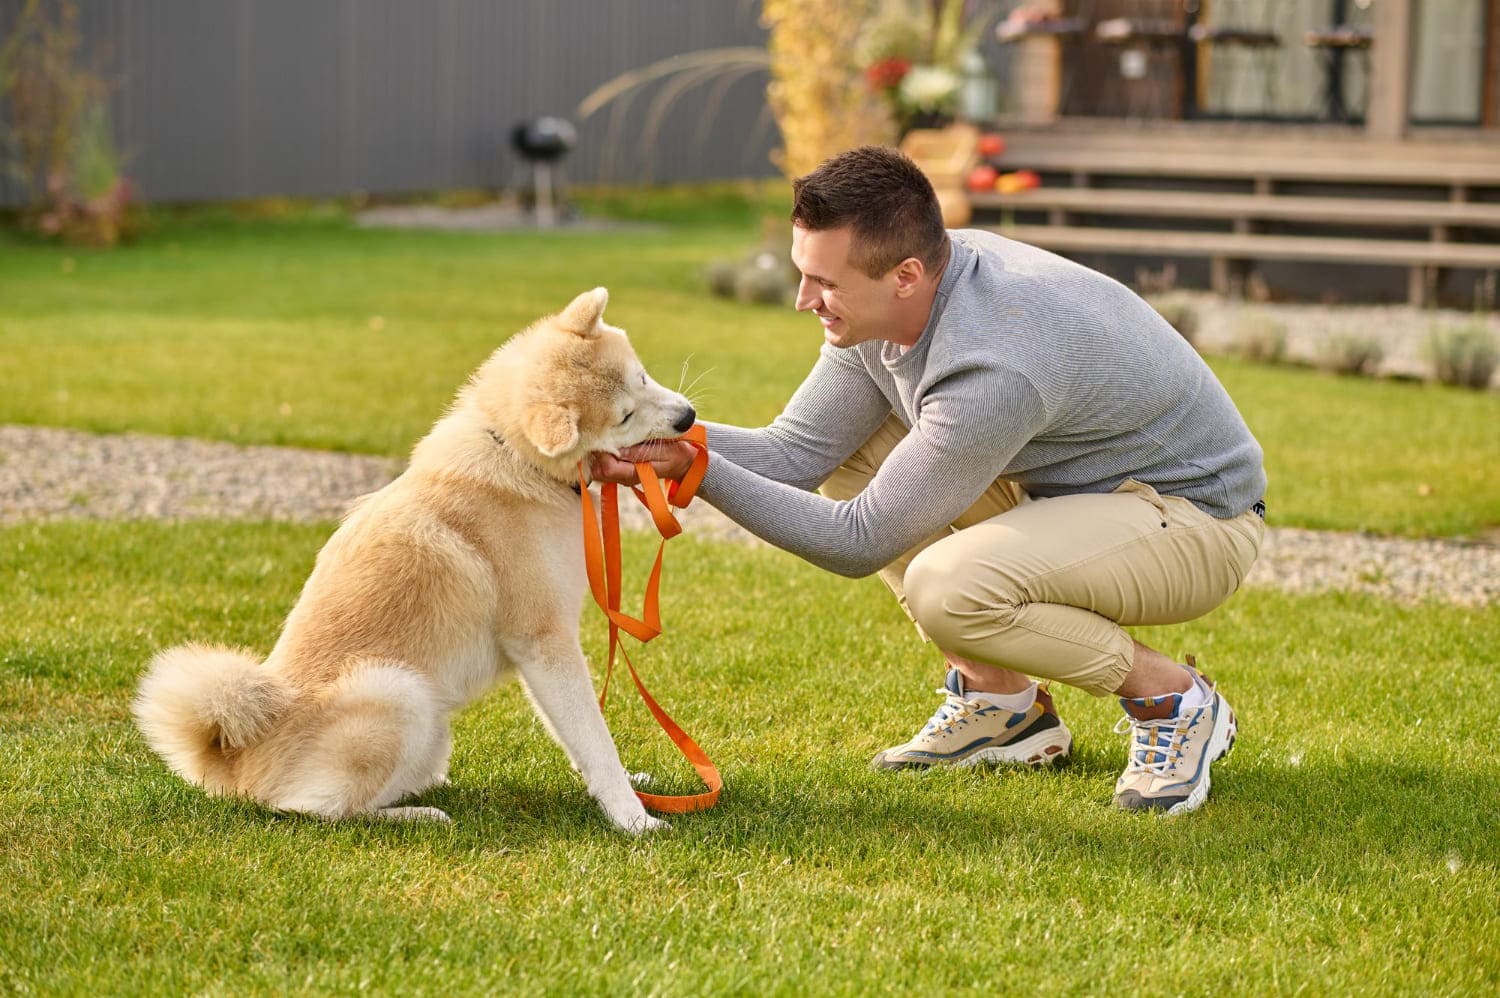 Train Your Dog To Be Less Strict With His Manners in a Social Environment